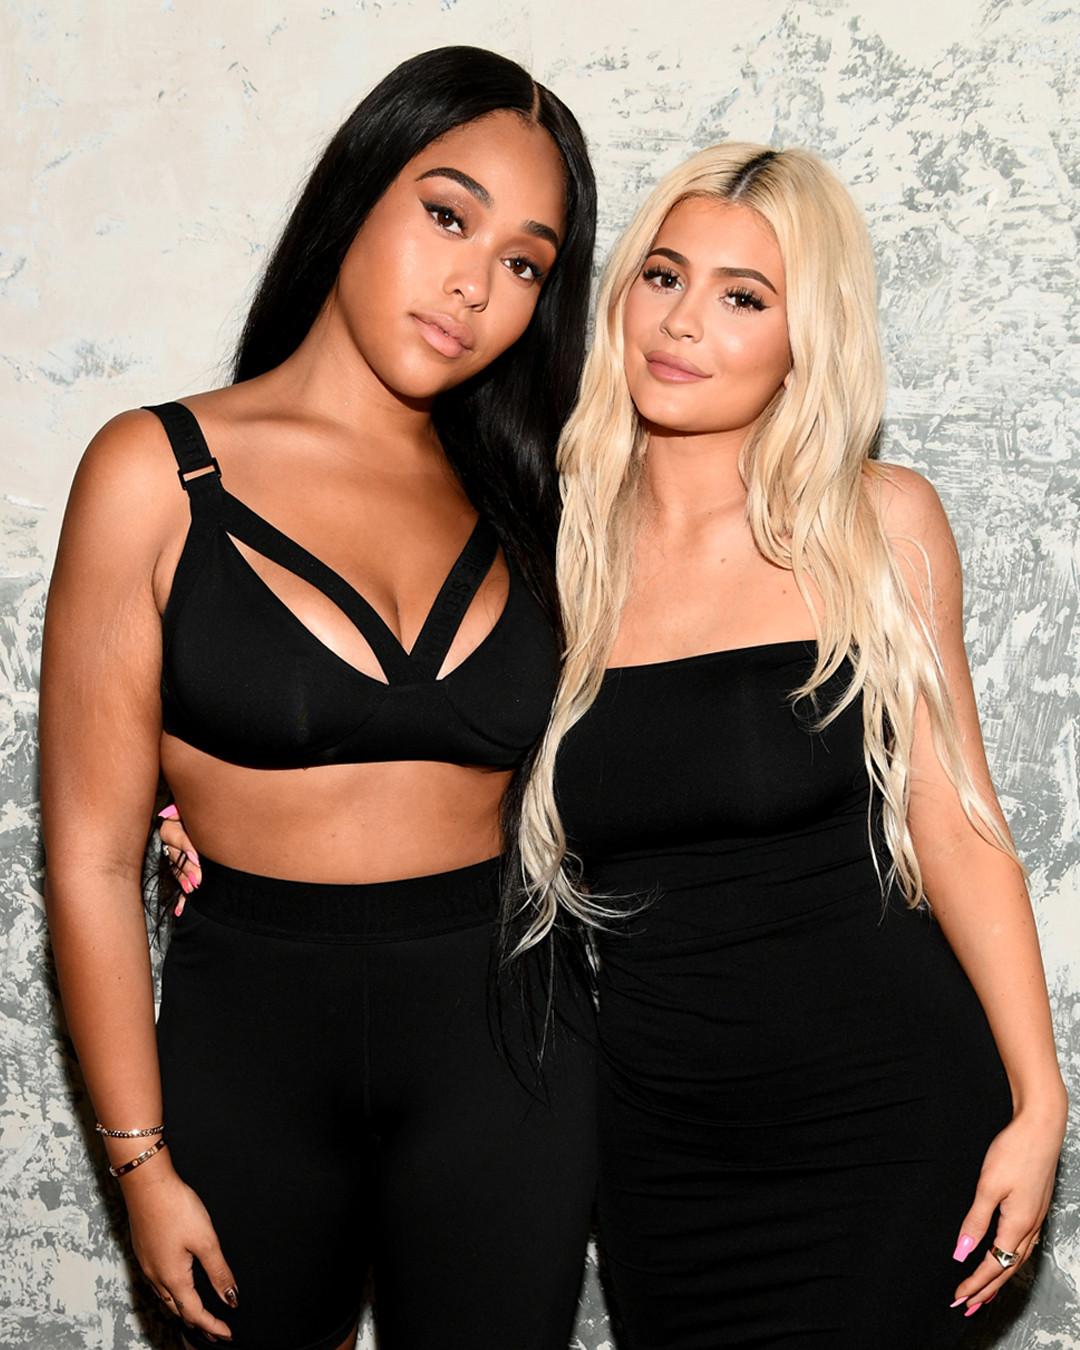 Behind Kylie Jenner and Jordyn Woods' Friendship Makeup, Modeling and